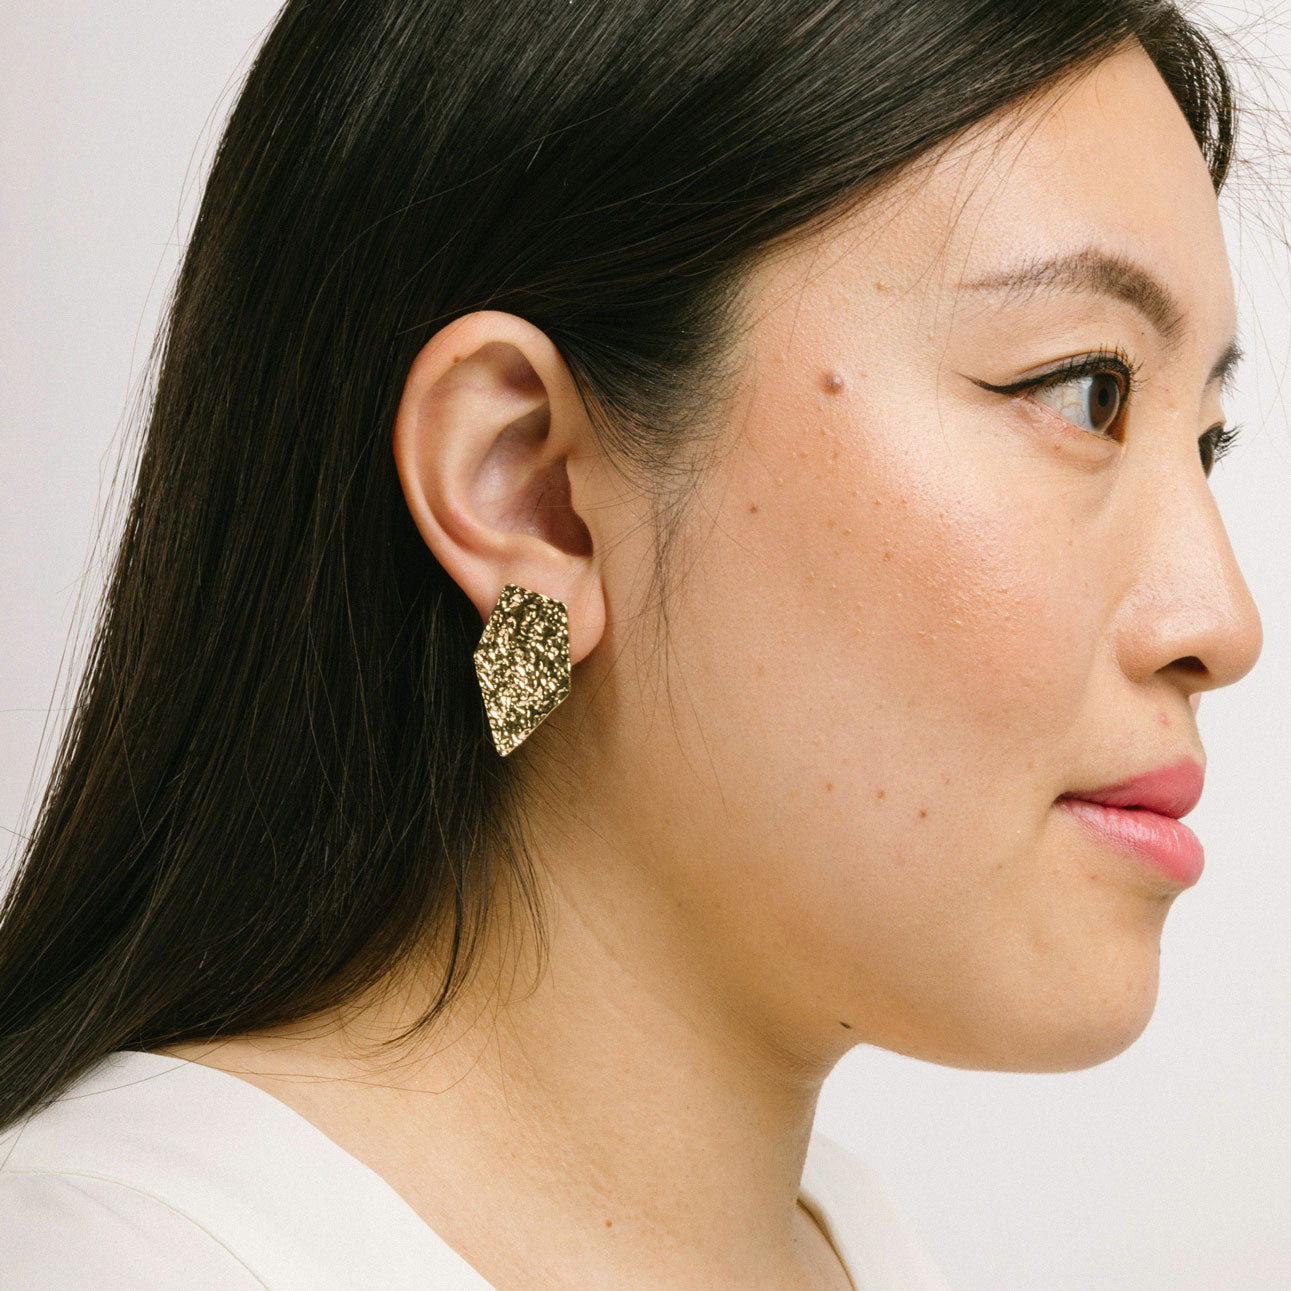 A model wearing the Vesper Clip On Earrings in Gold boast a secure padded clip-on closure, suitable for all ear types, with hold strength designed to last 8-12 hours. Crafted from zinc alloy and copper alloy, this single pair is adjustable and comfortable to wear.